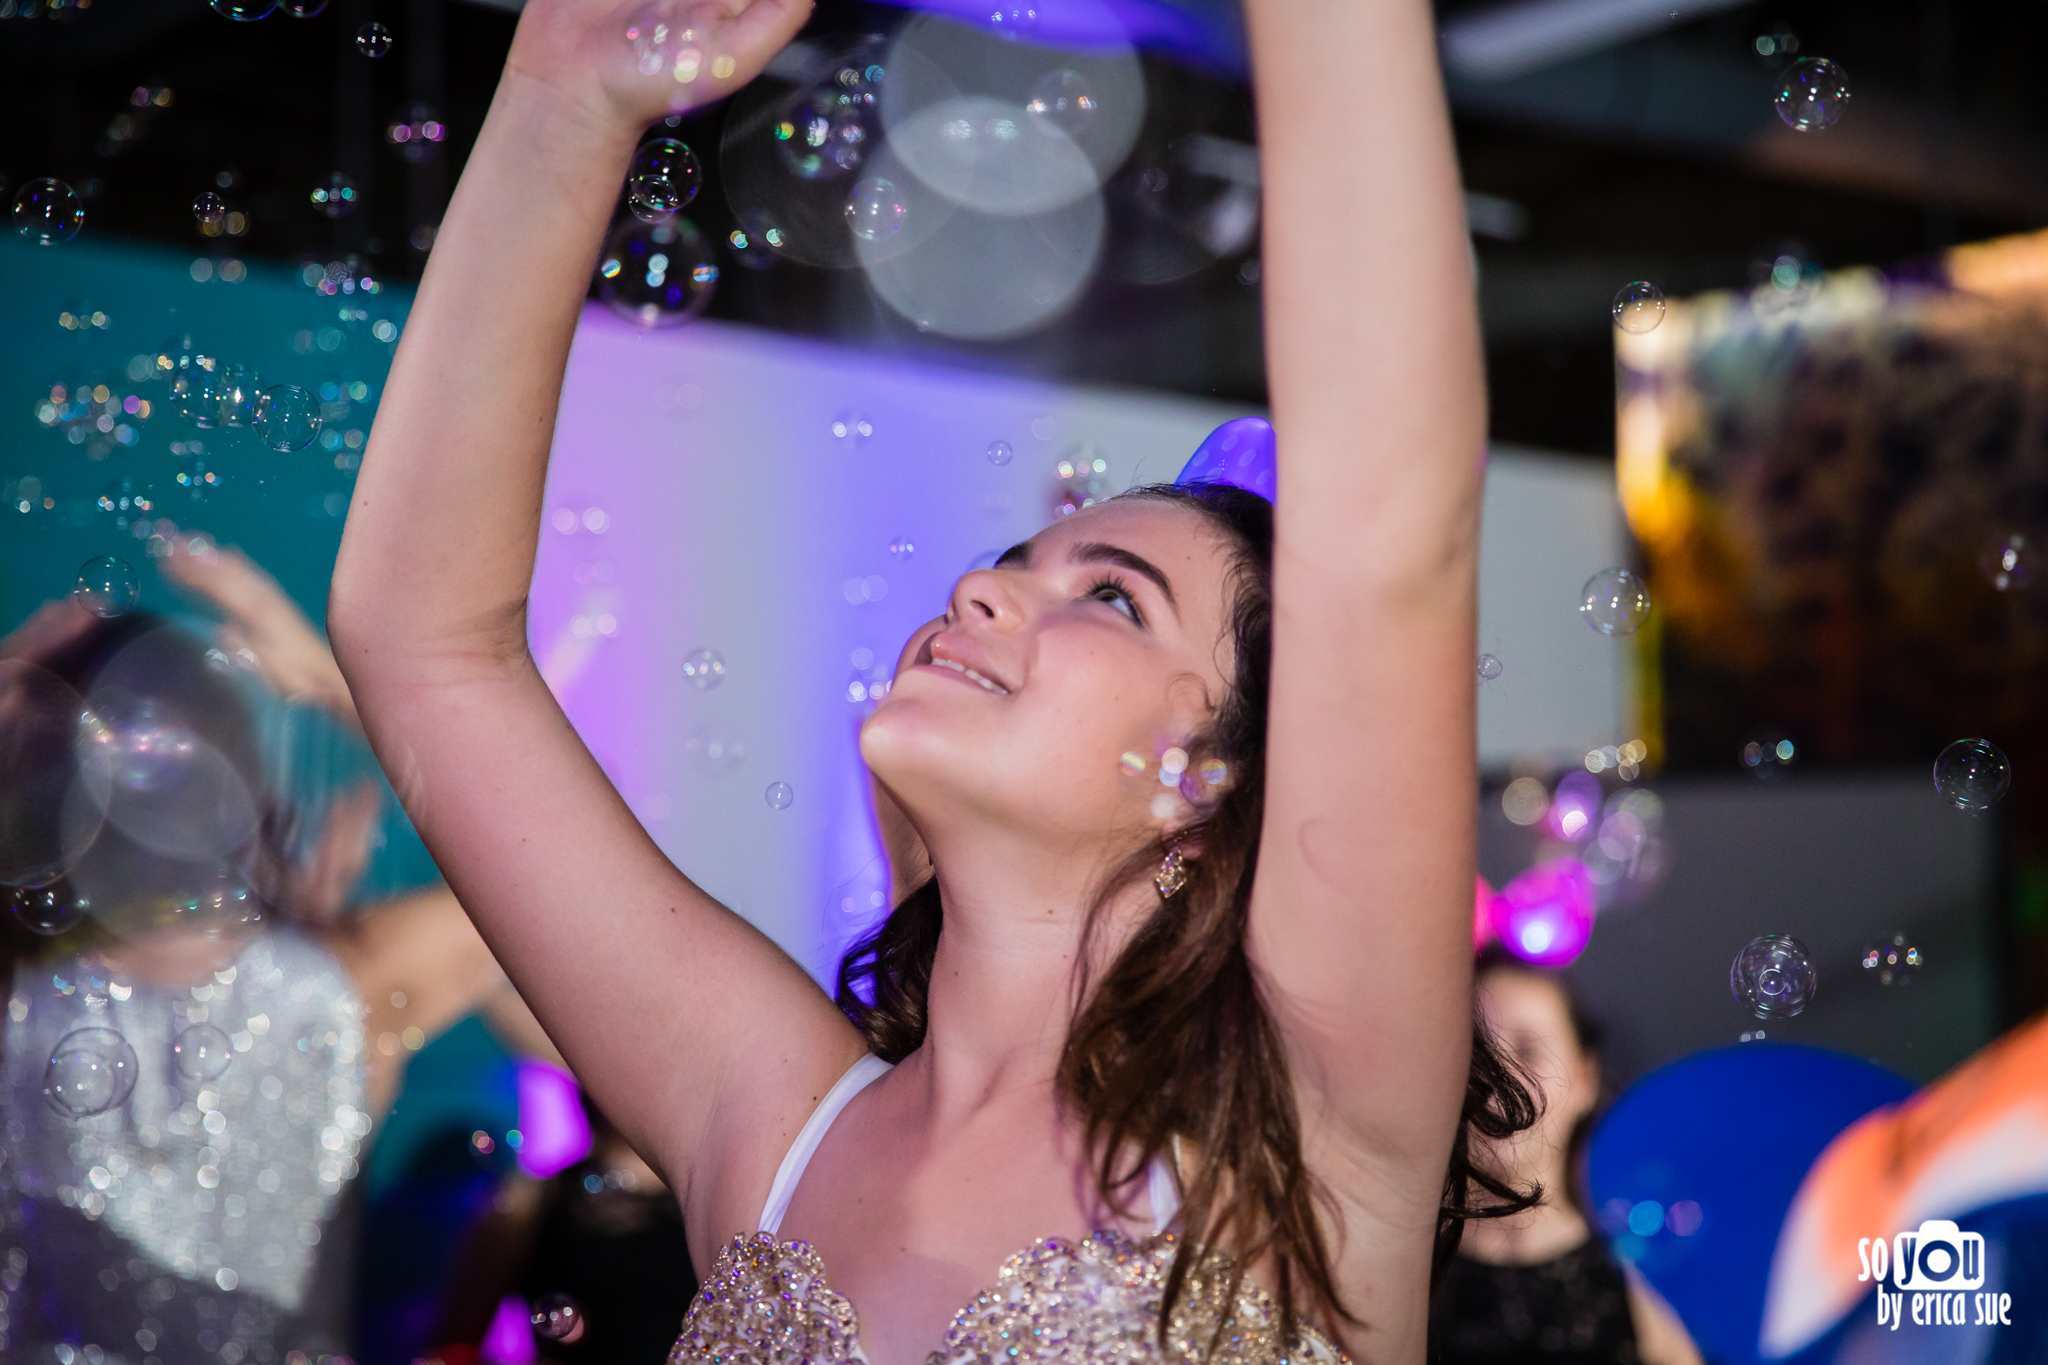 so-you-by-erica-sue-bar-bat-mitzvah-young-at-art-davie-fl-photography-6050.jpg